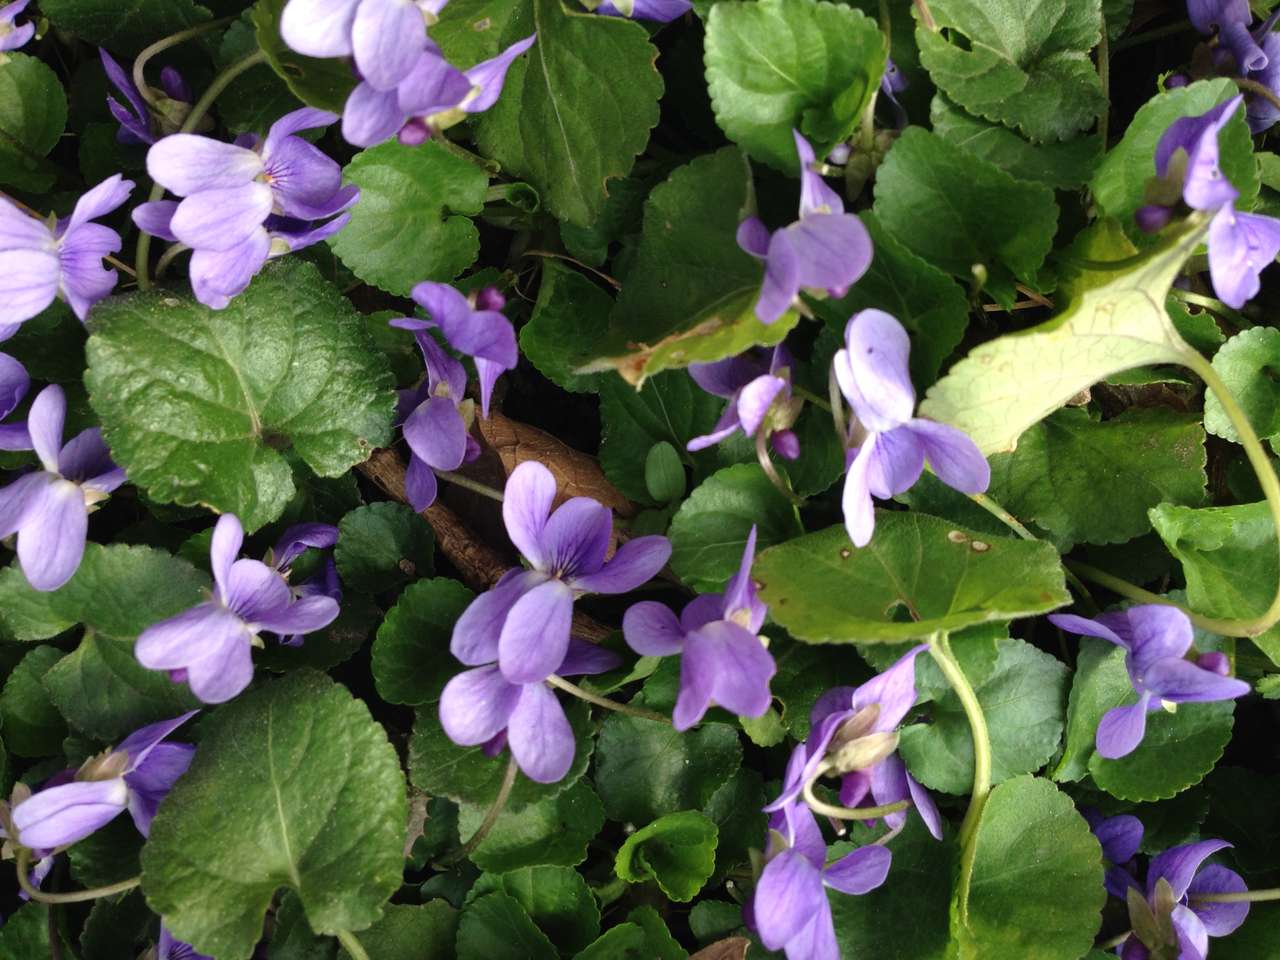 Violets - Violets puzzle online from photo